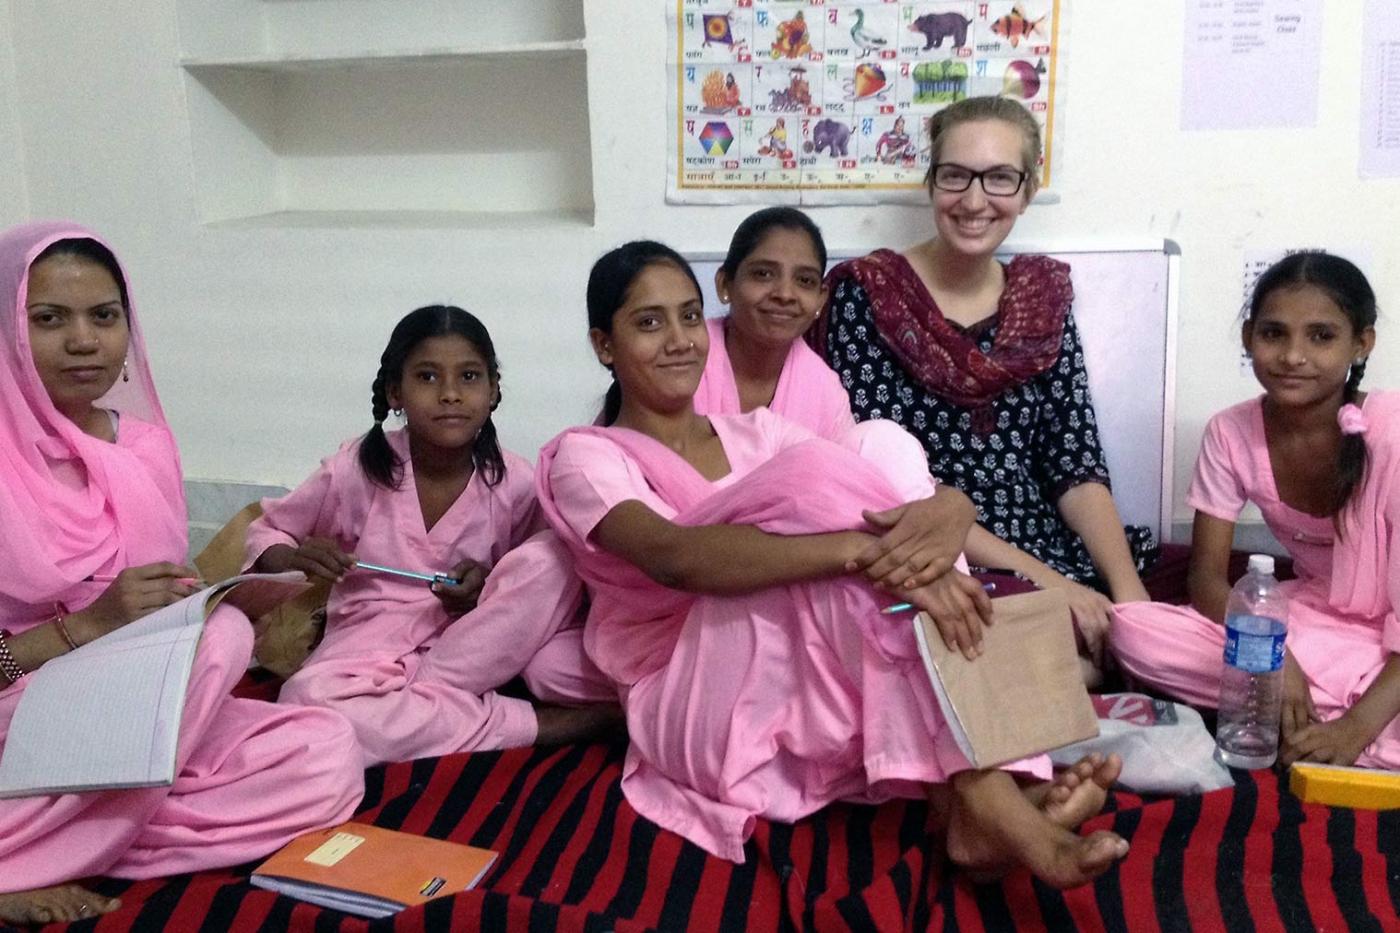 A Day in the Life of a Volunteer in India